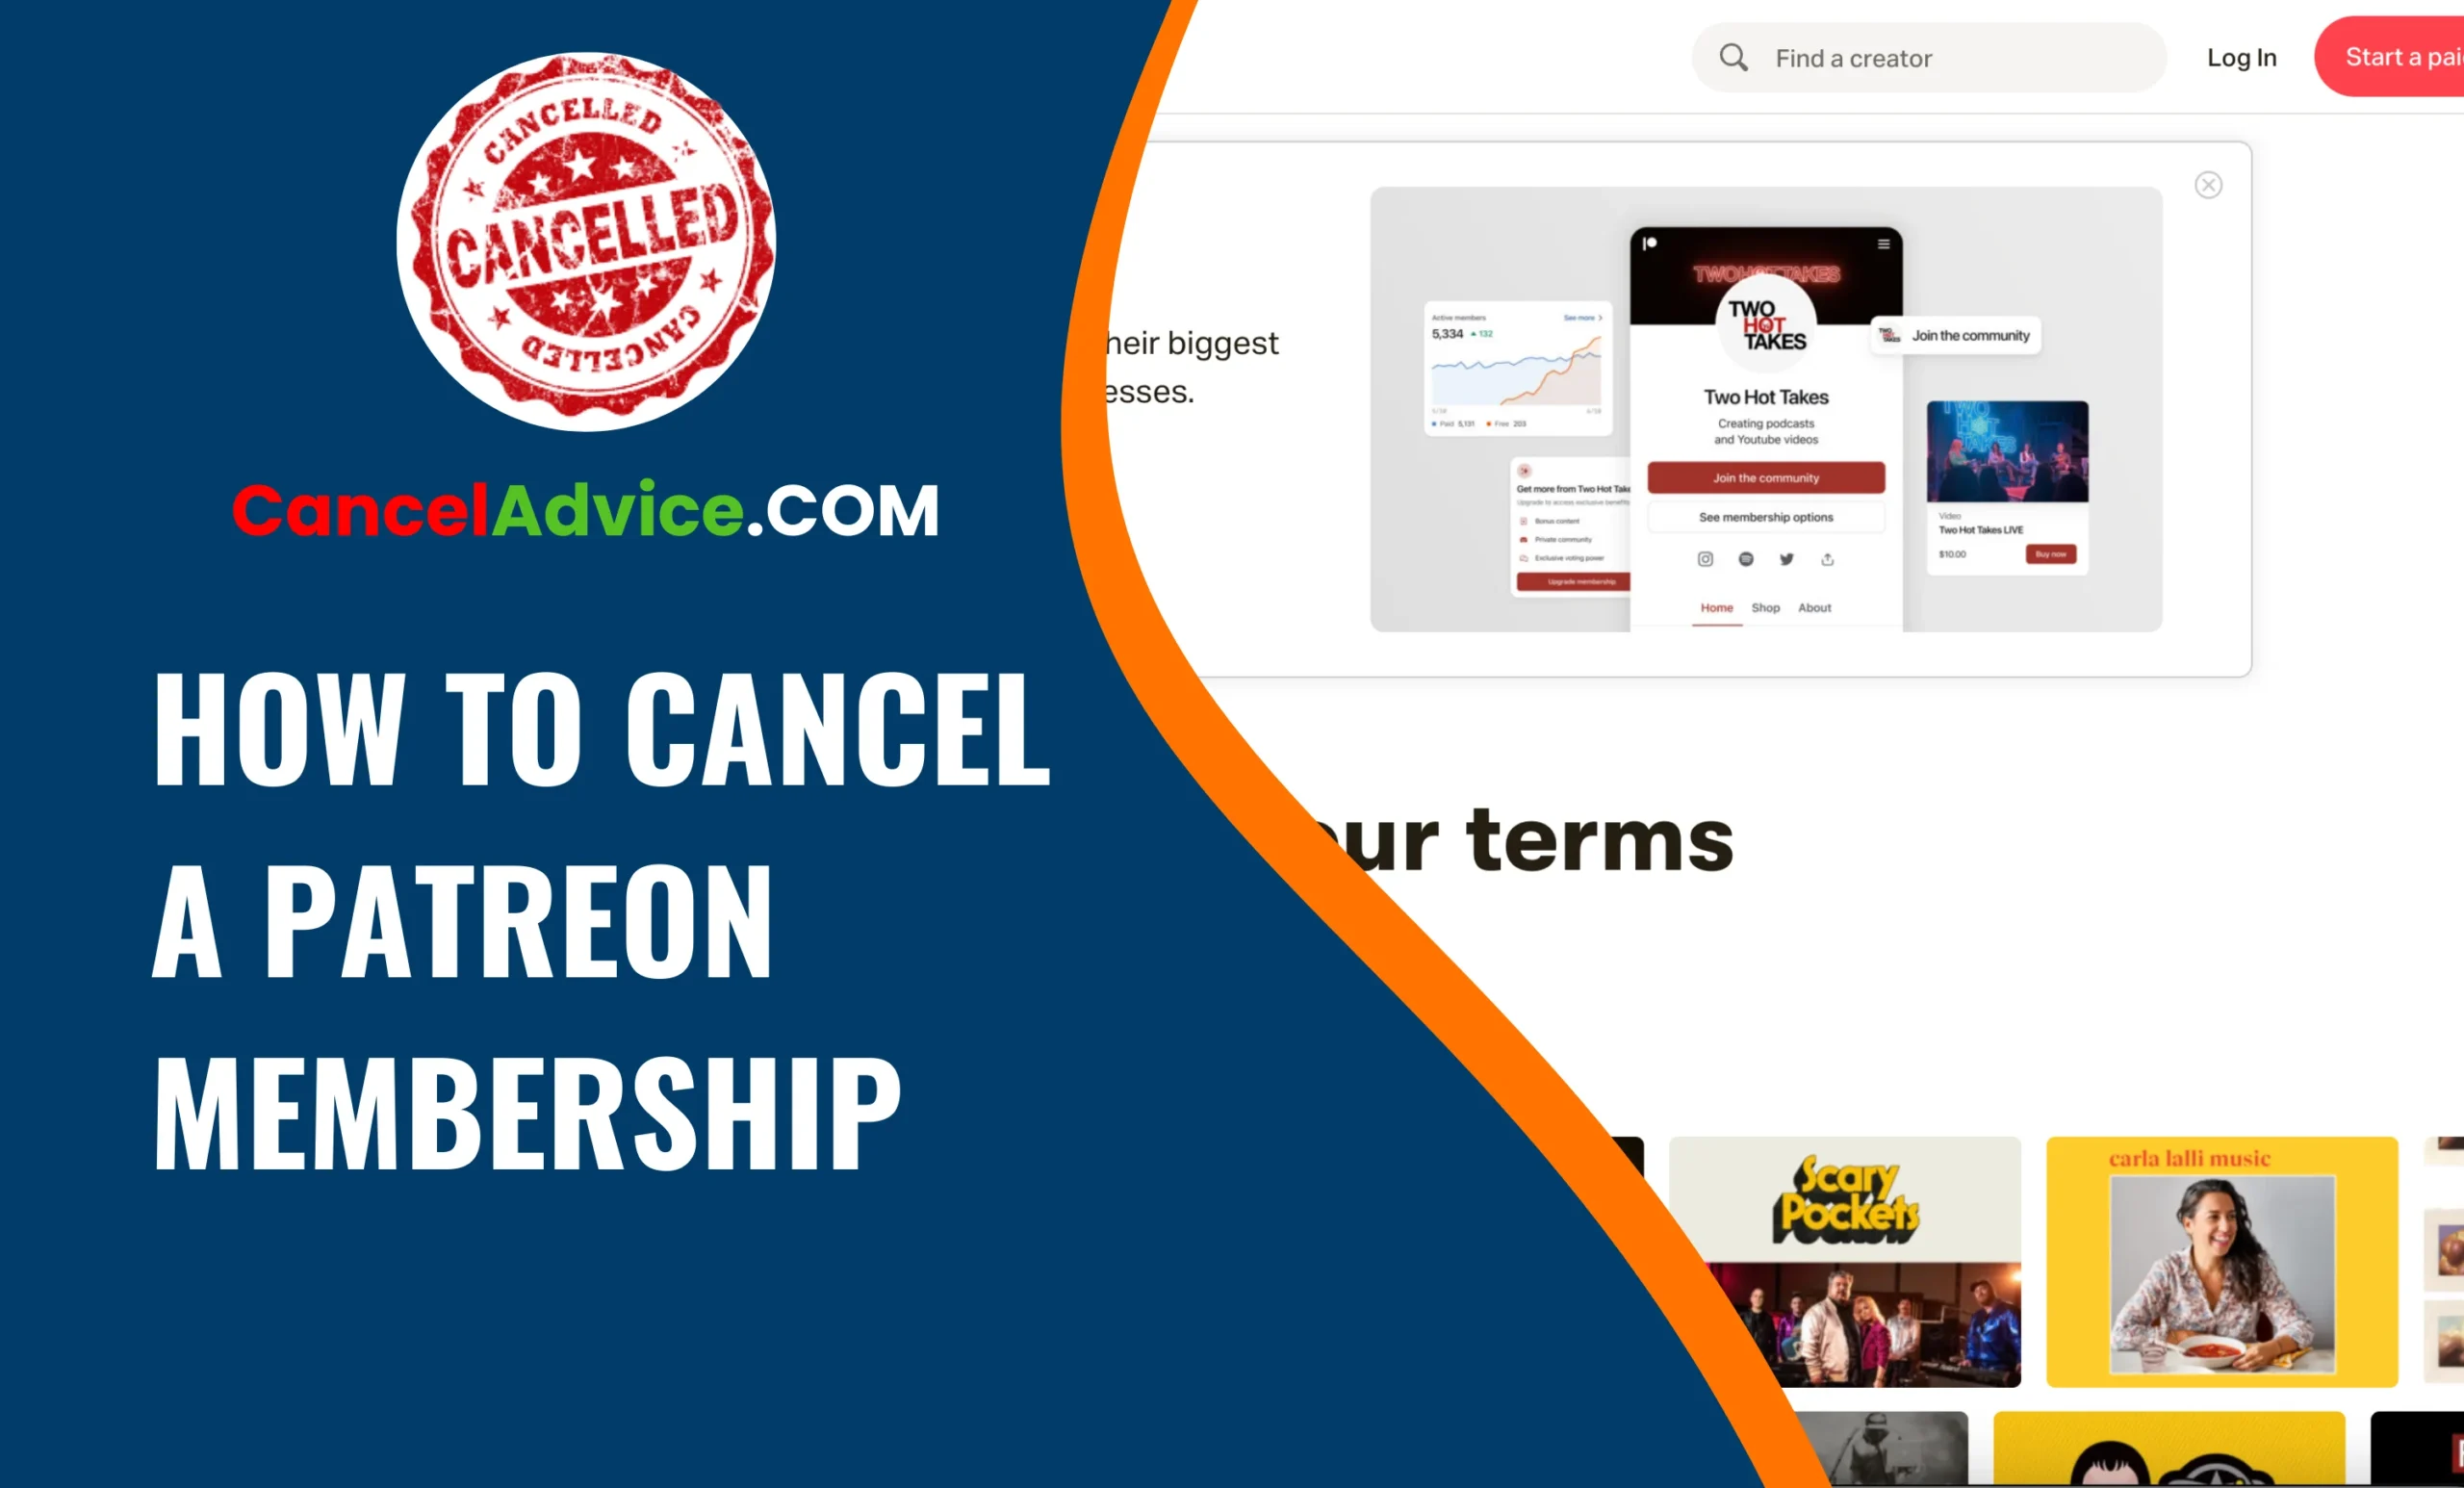 How To Cancel A Patreon Membership